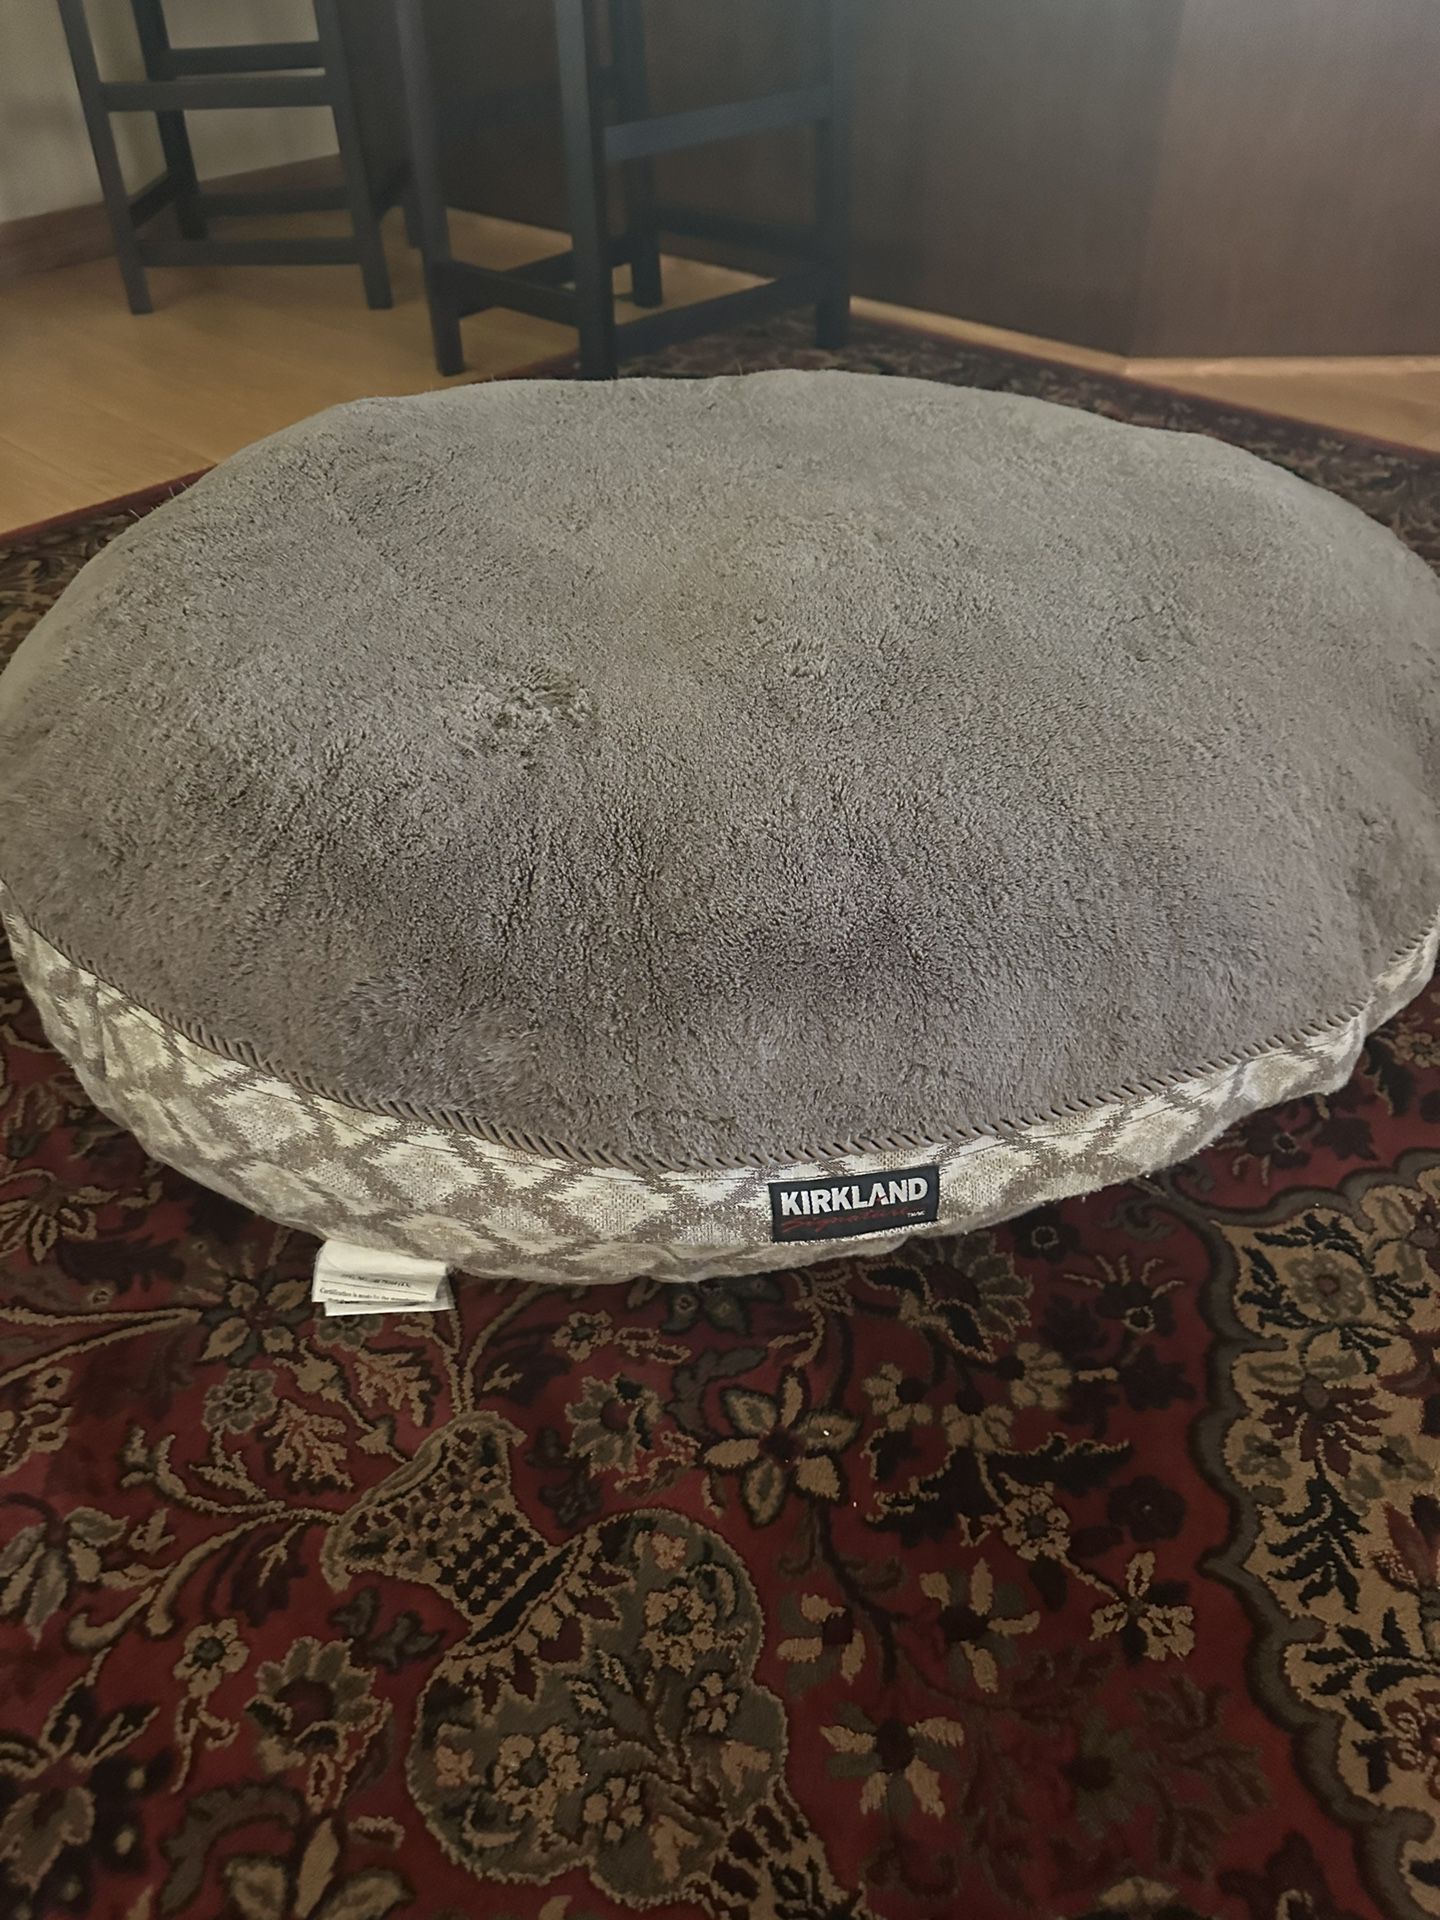 FREE Large Animal Bed-Great Condition!